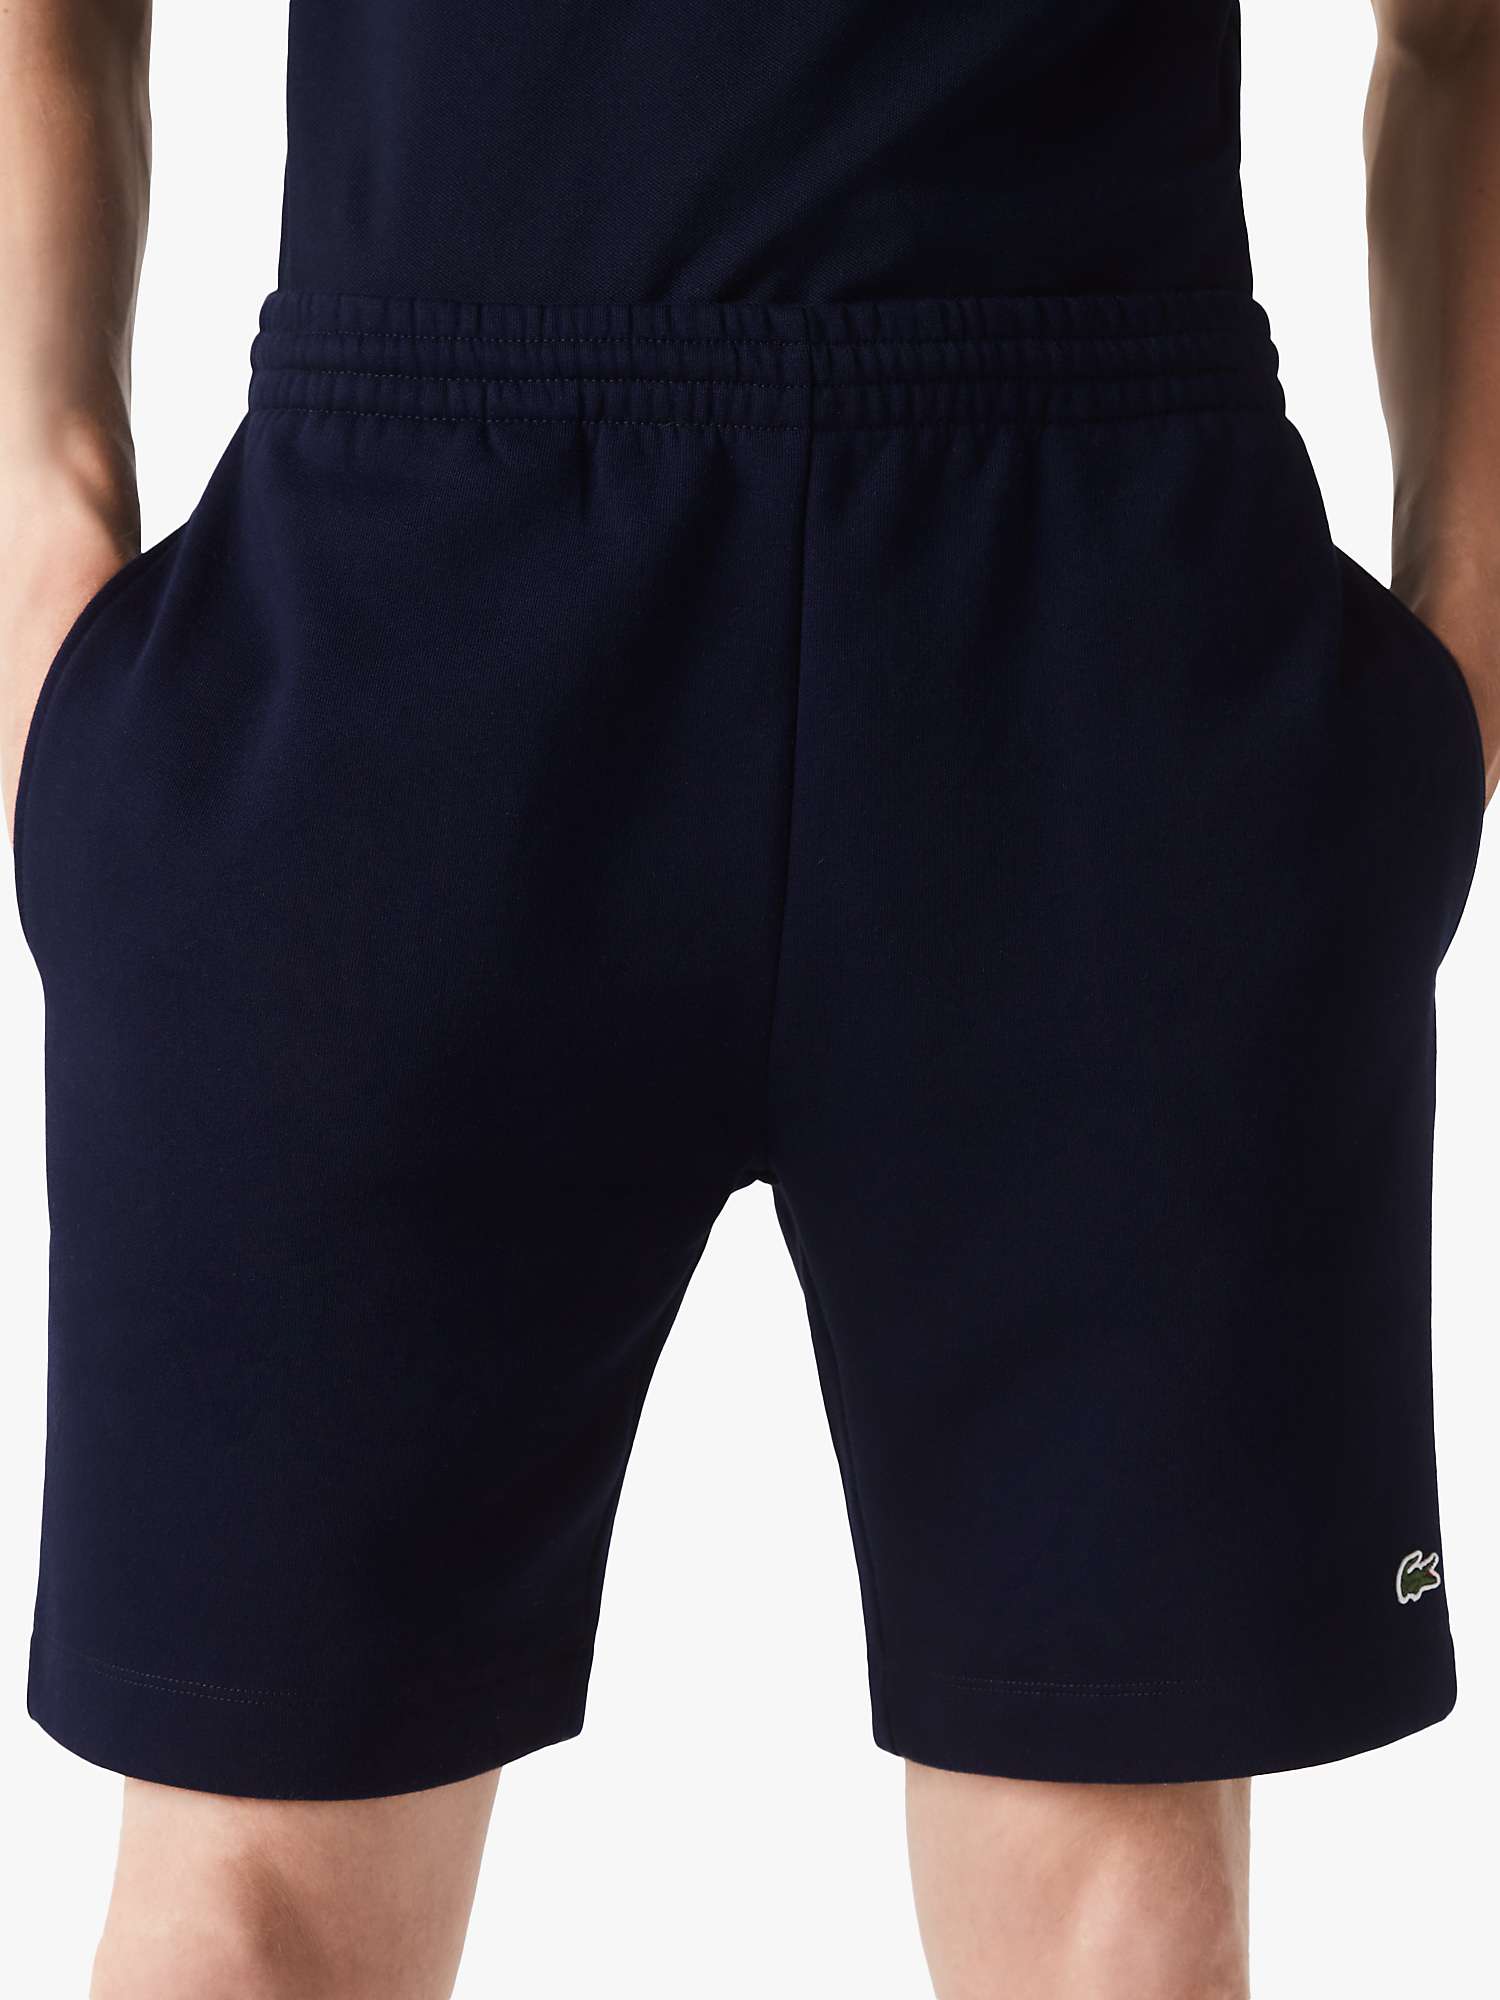 Buy Lacoste Classic Logo Jogger Sweat Shorts, 166 Online at johnlewis.com